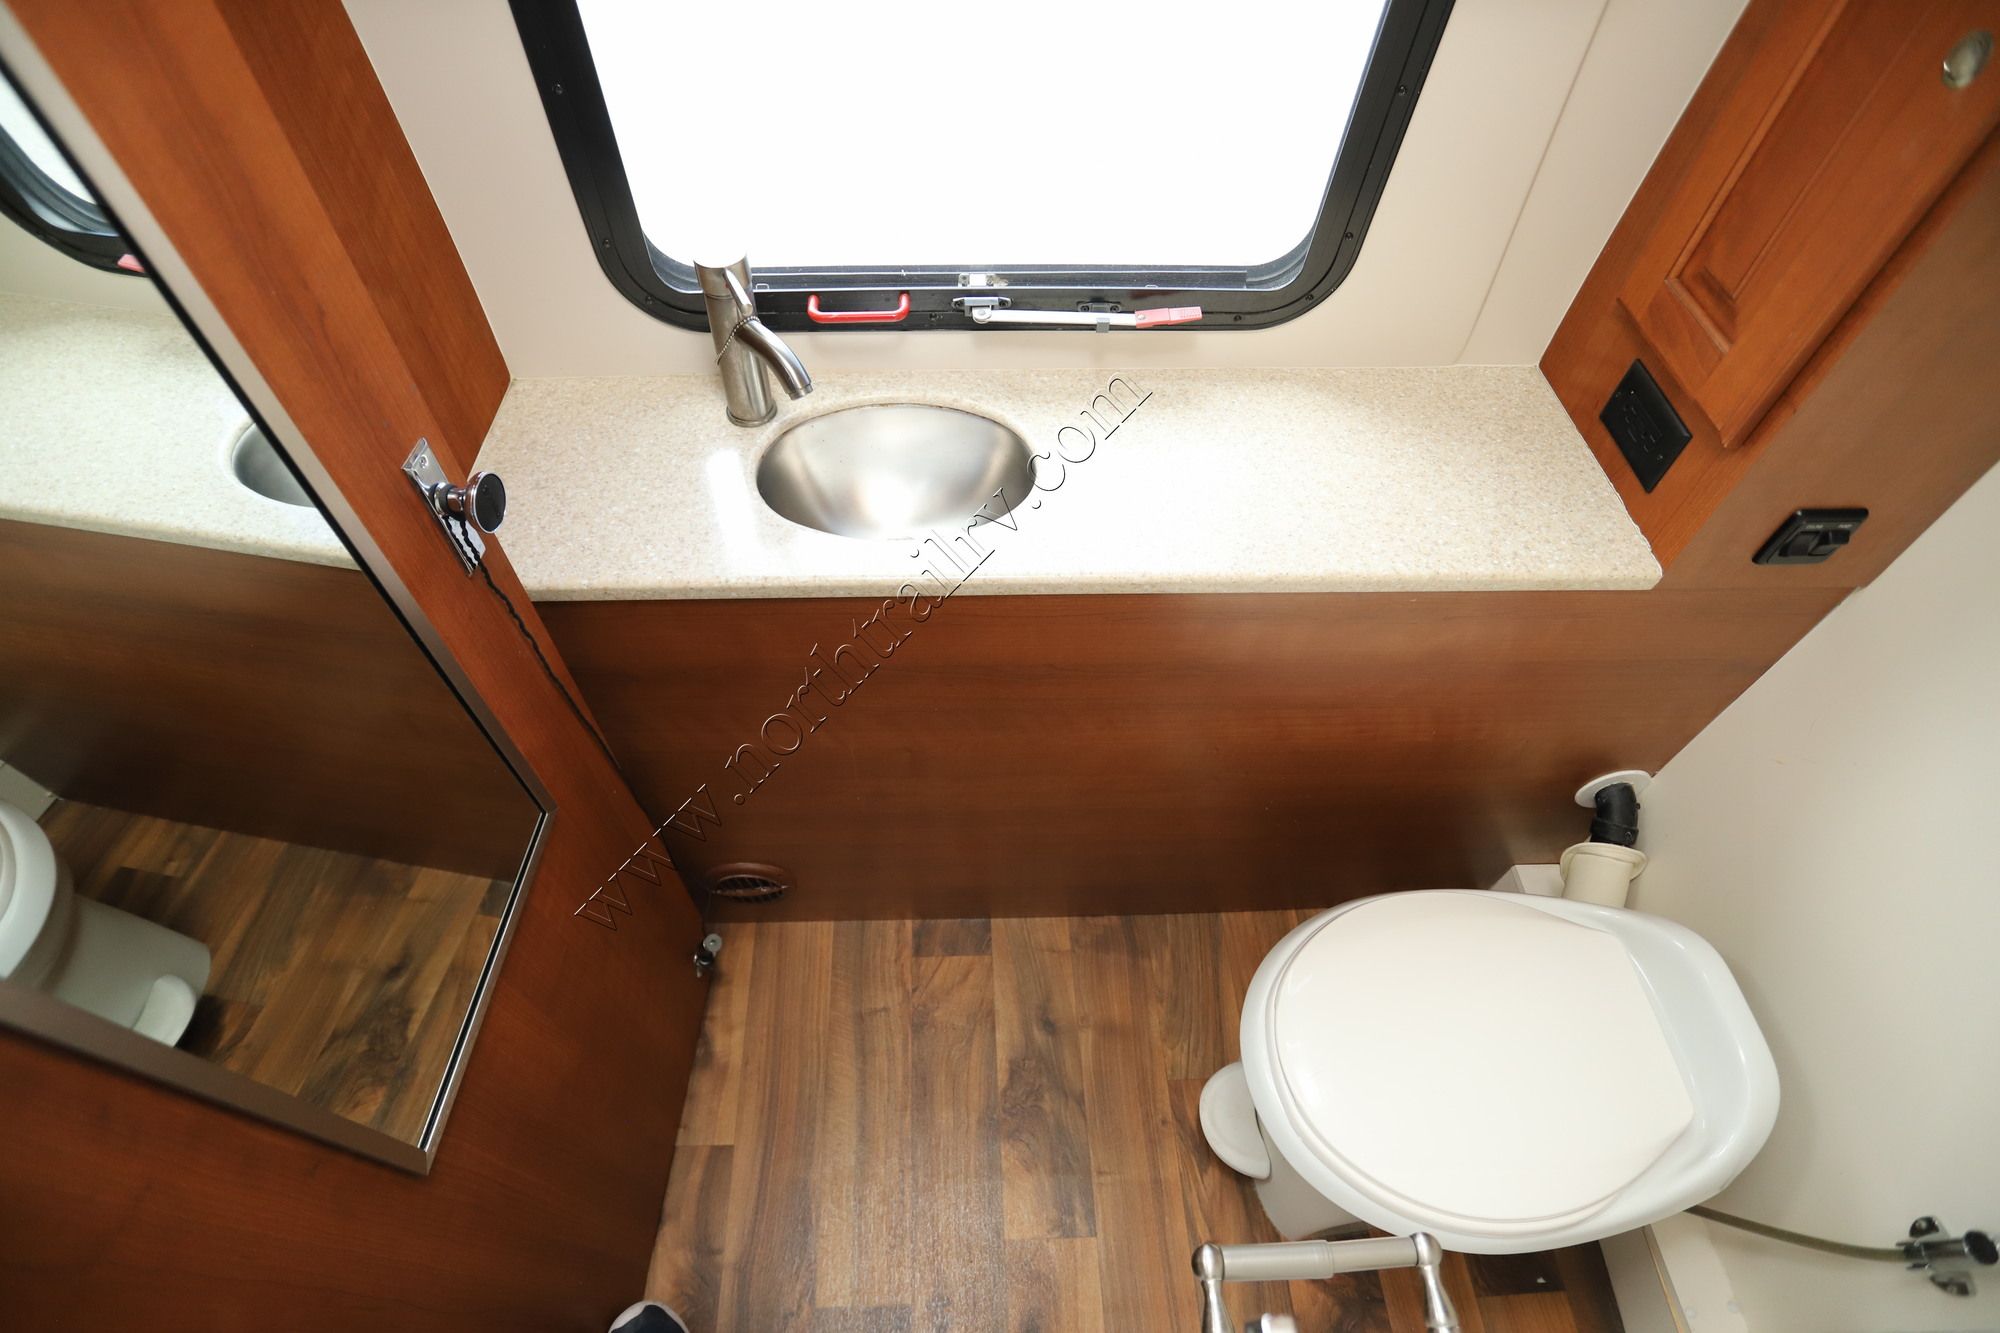 Used 2016 Coach House Platinum Ii 241 XL Class C  For Sale